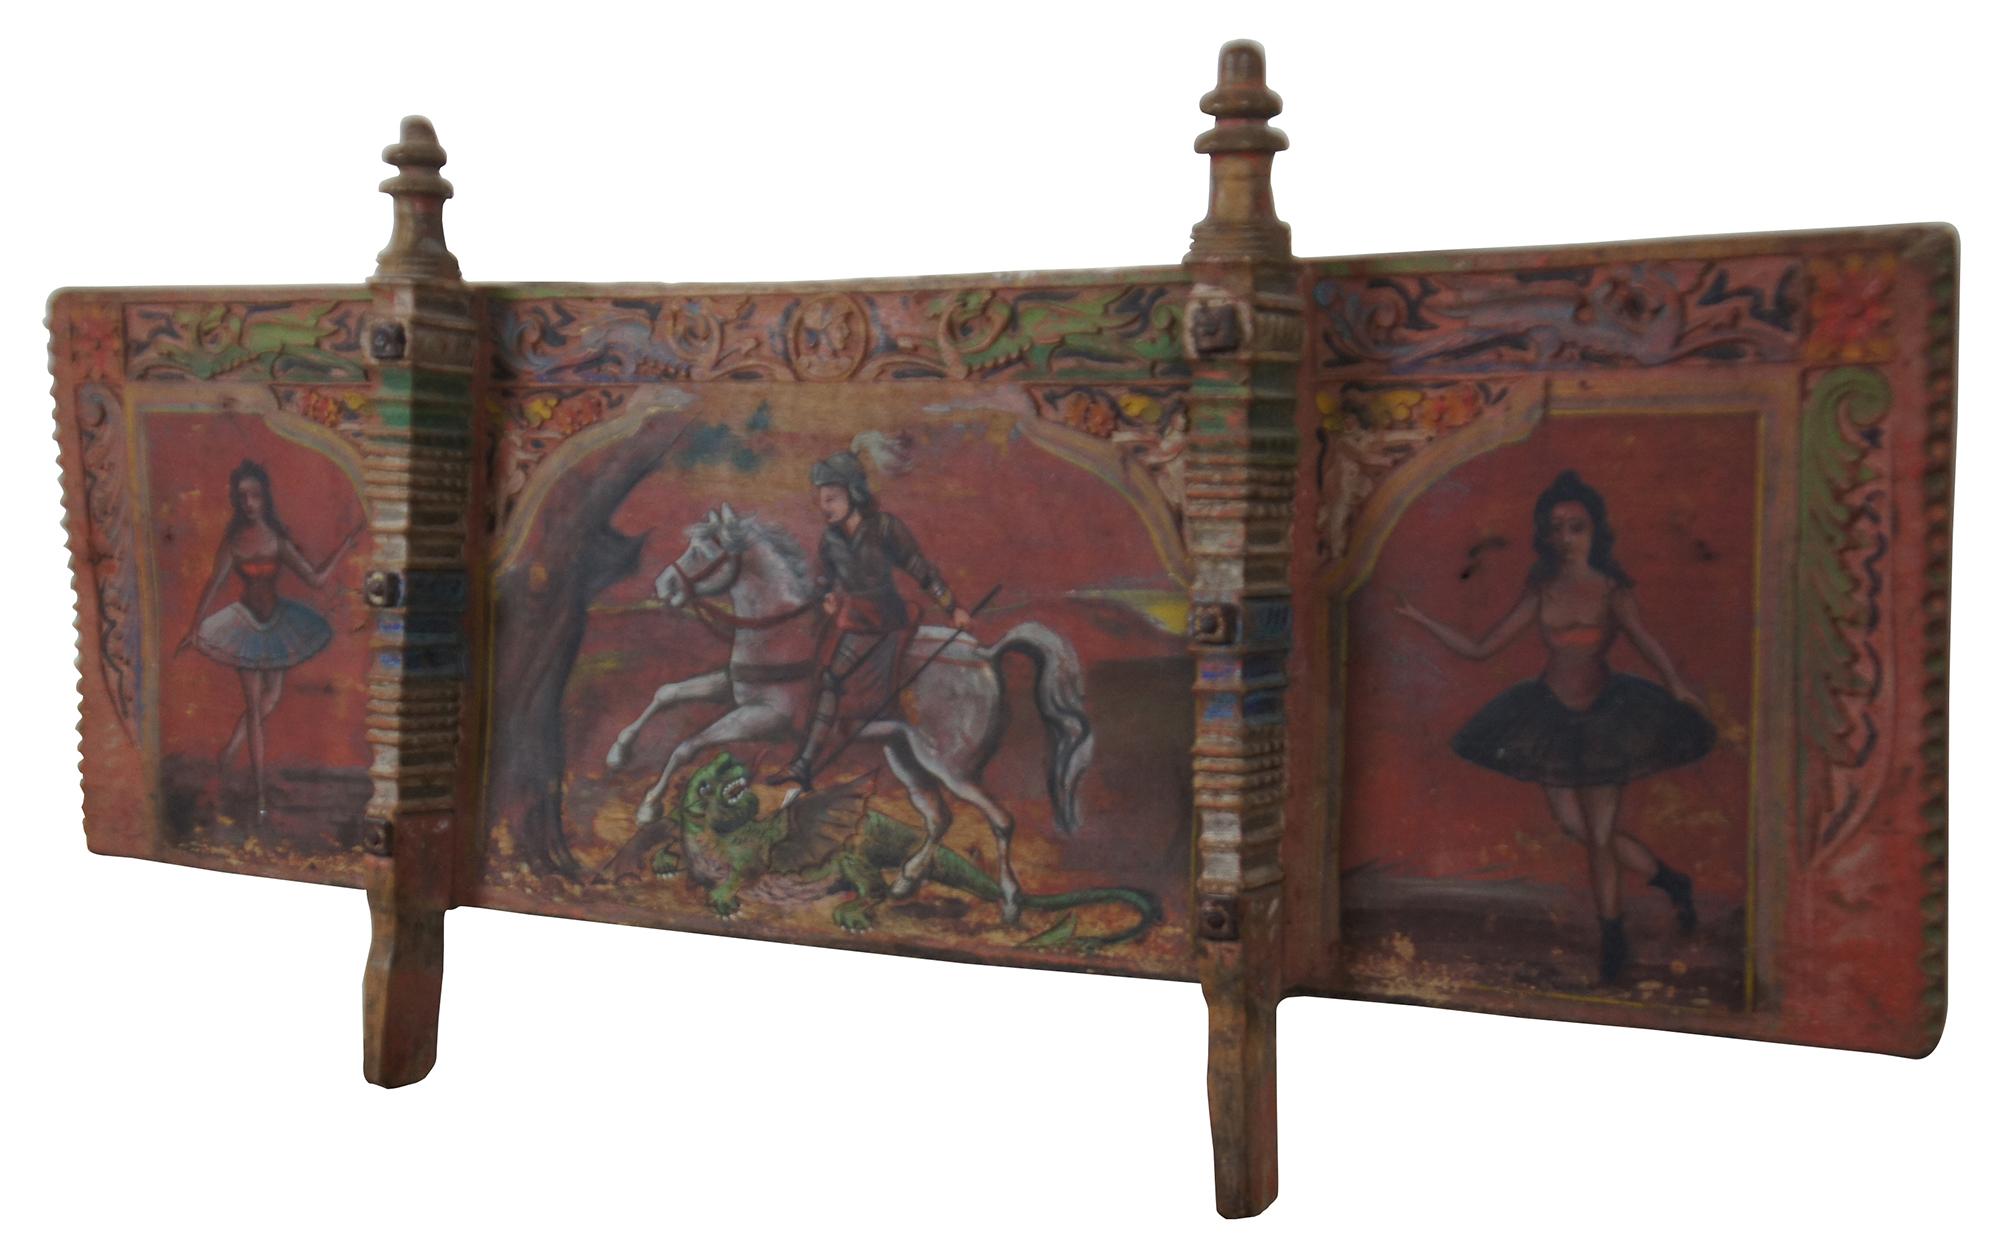 Antique Scicilian Carretto carved and Folk Art painted wooden panel originally the rear-most side of a donkey or small horse cart. The vertical posts would slot into matching holes on the floor of the cart. The center portion shows Saint George